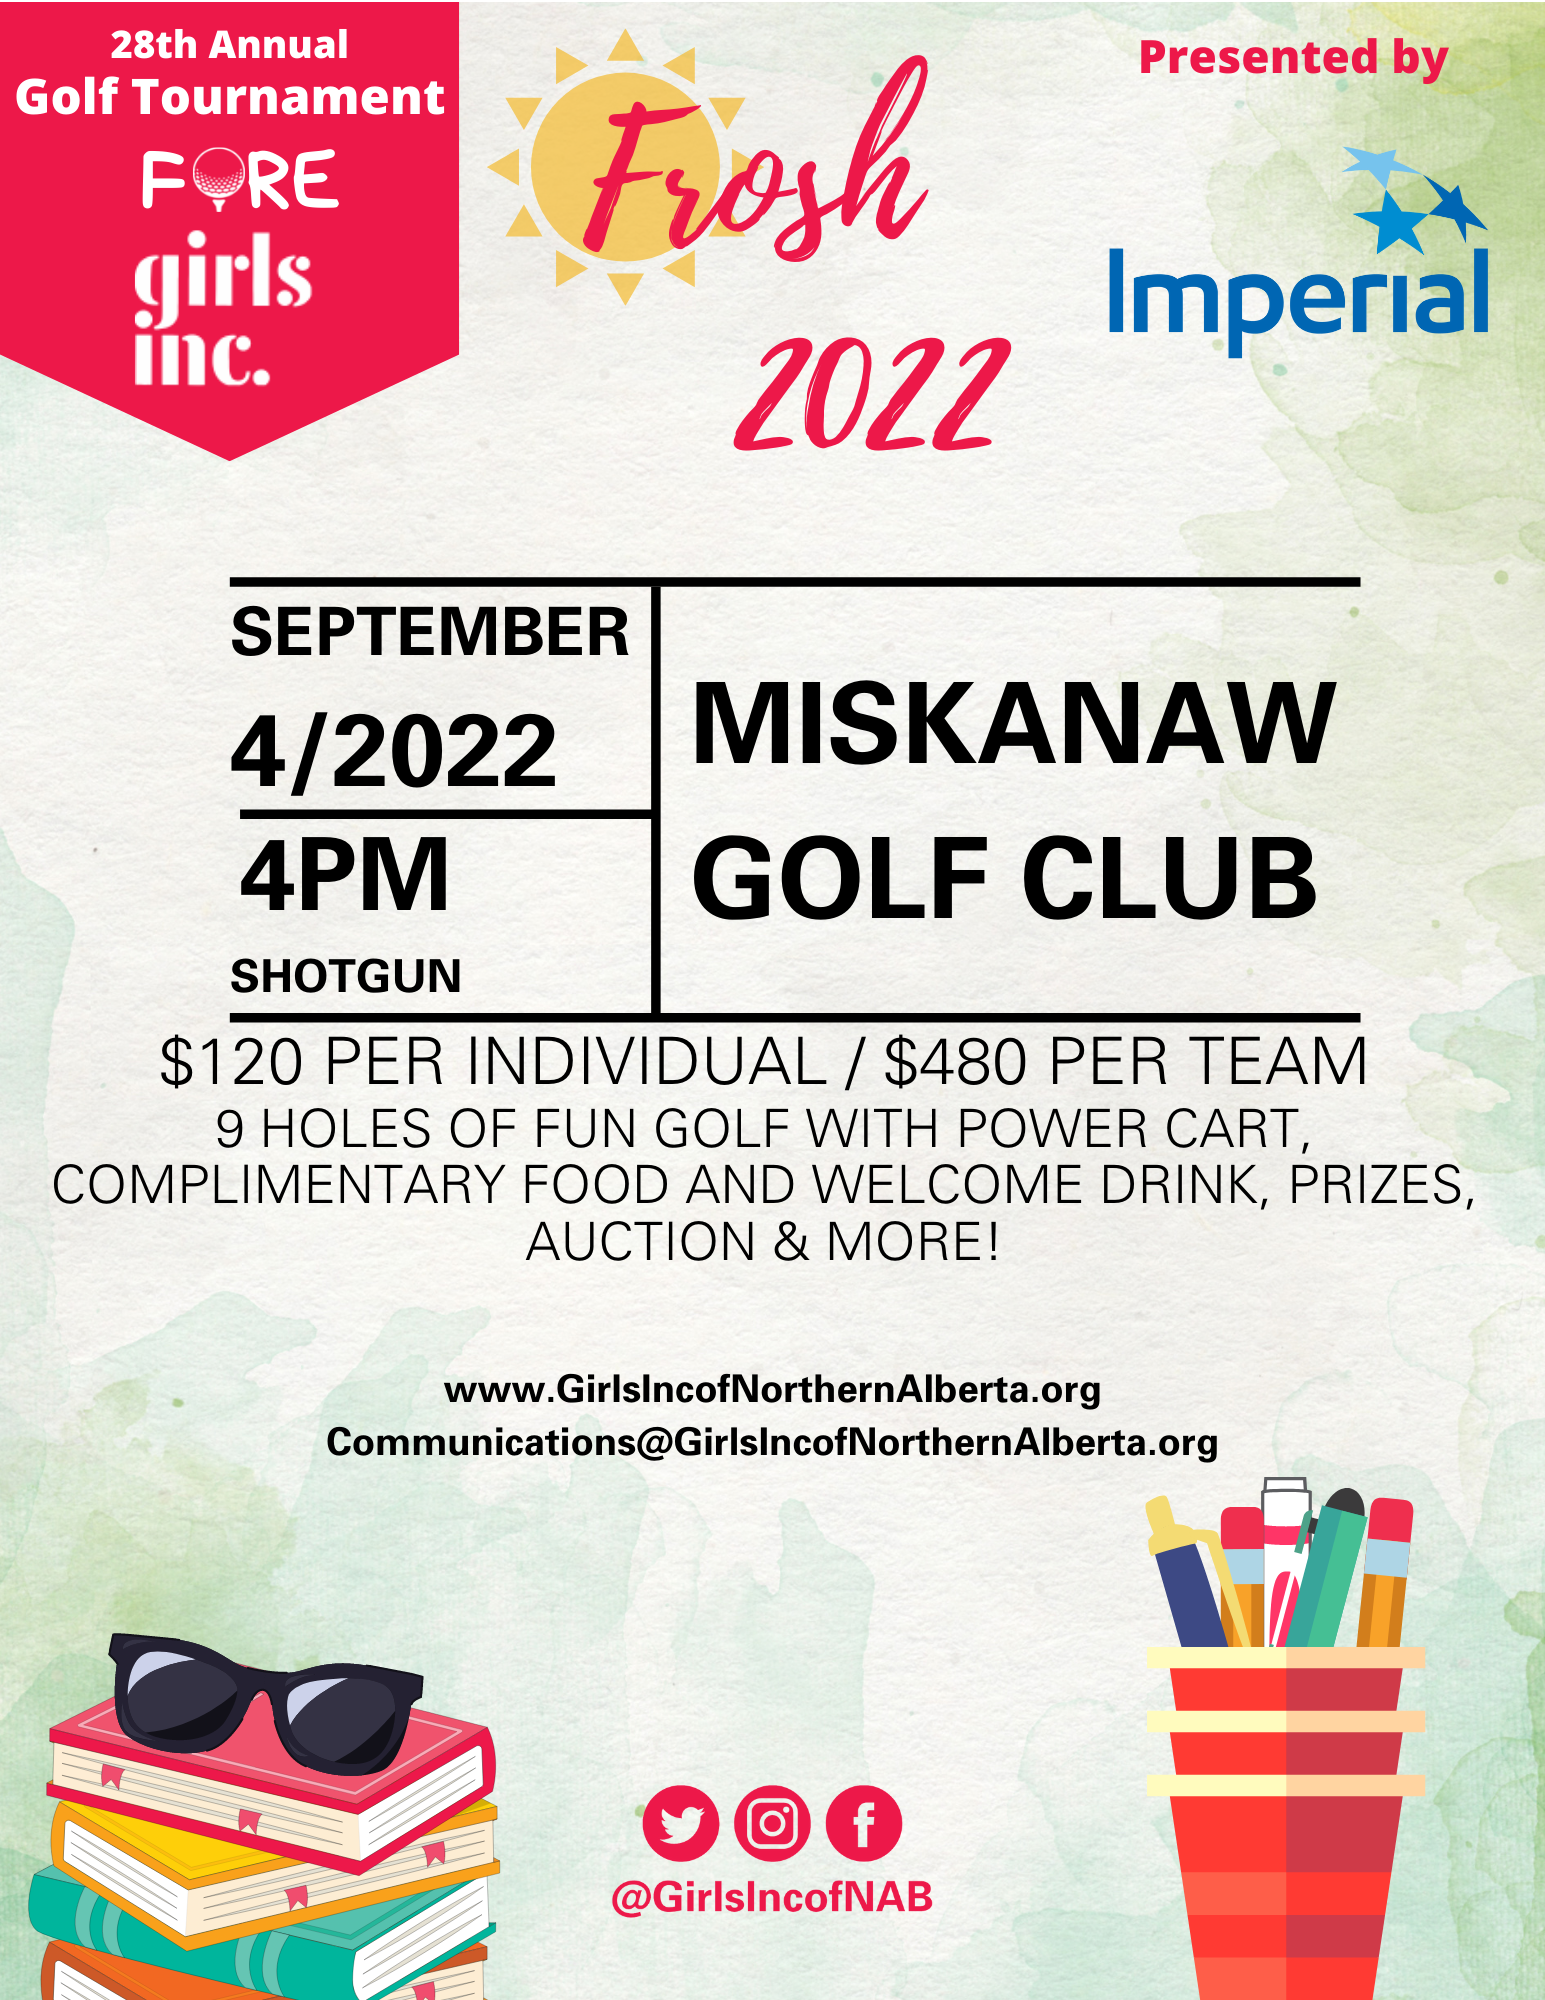 28th Annual Golf Tournament Fore Girls Inc. presented by Imperial. Frosh 2022.